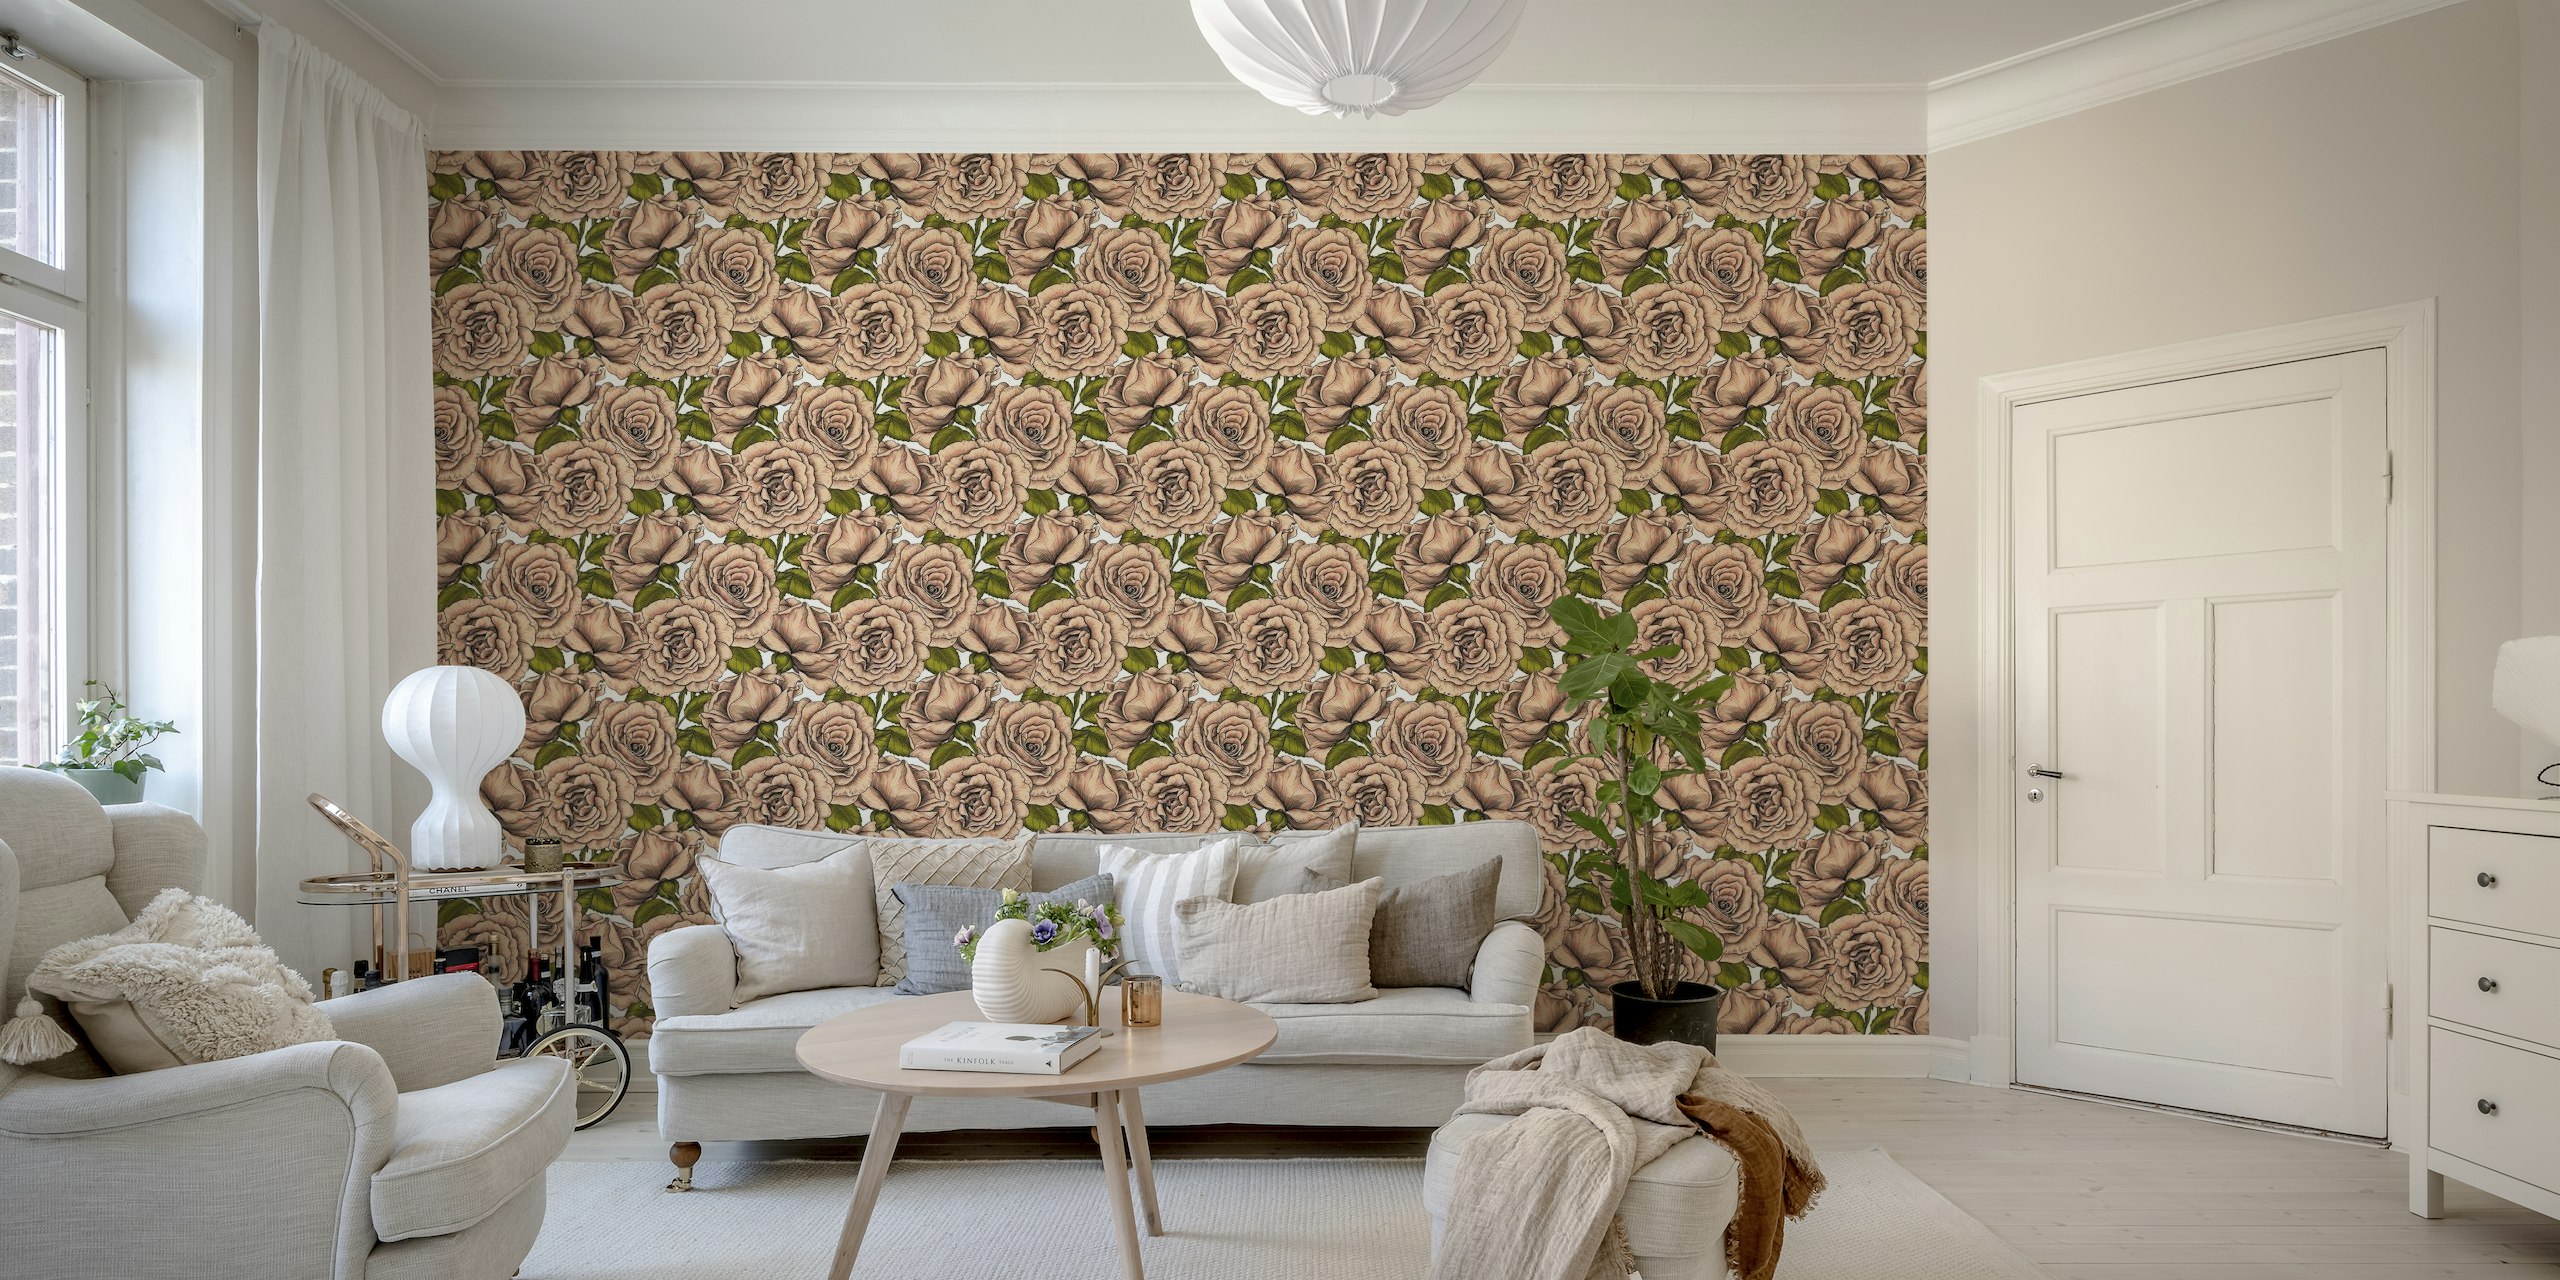 Cream-colored roses wall mural with full blooms and green leaves